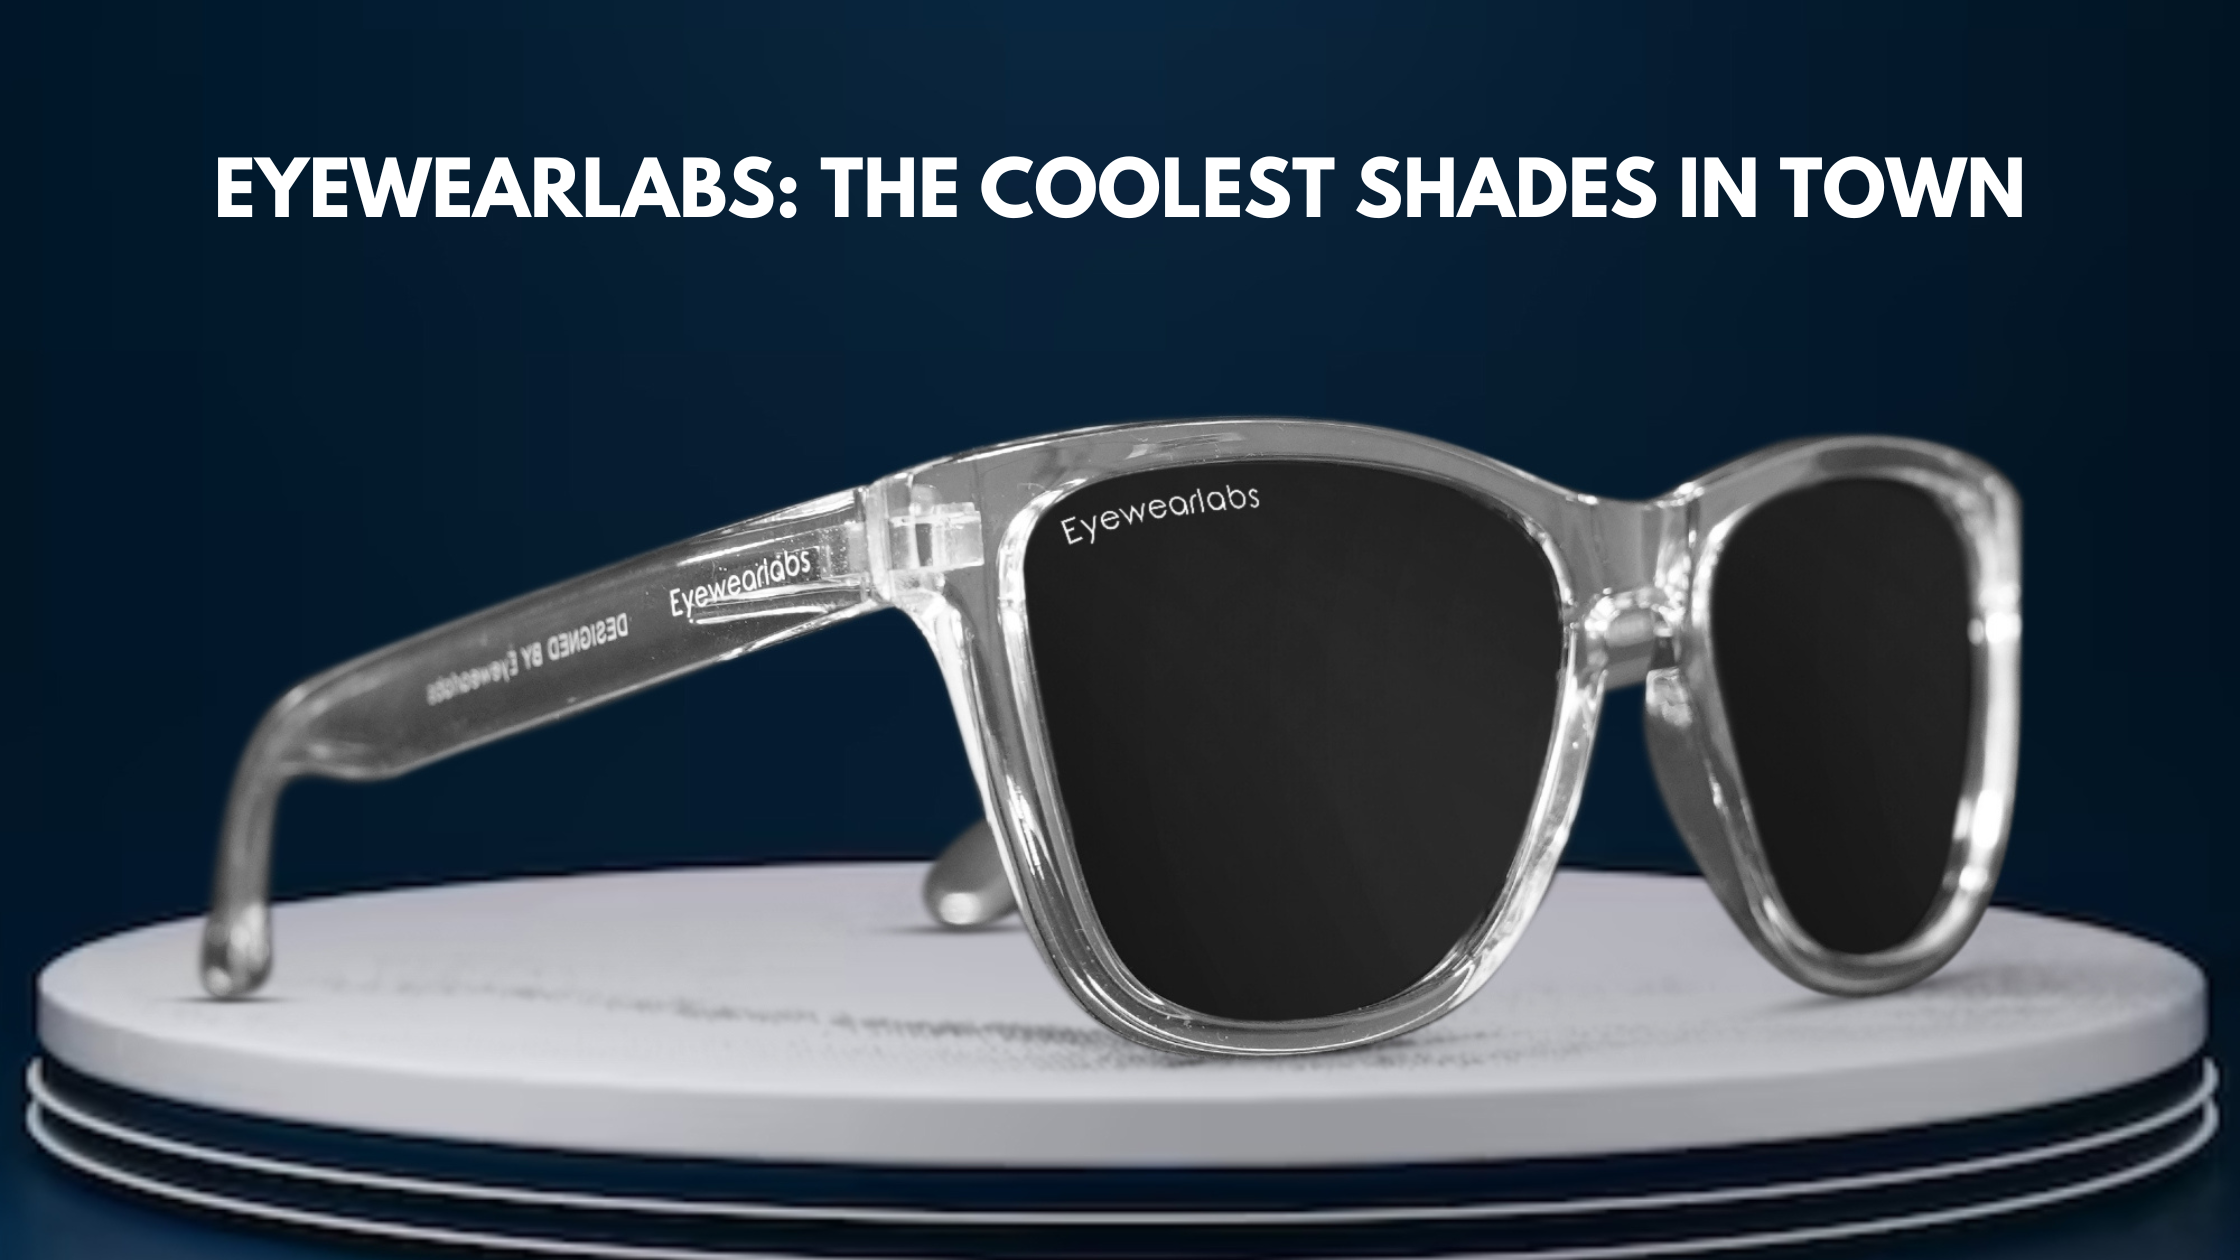 Eyewearlabs: The Coolest Shades in Town